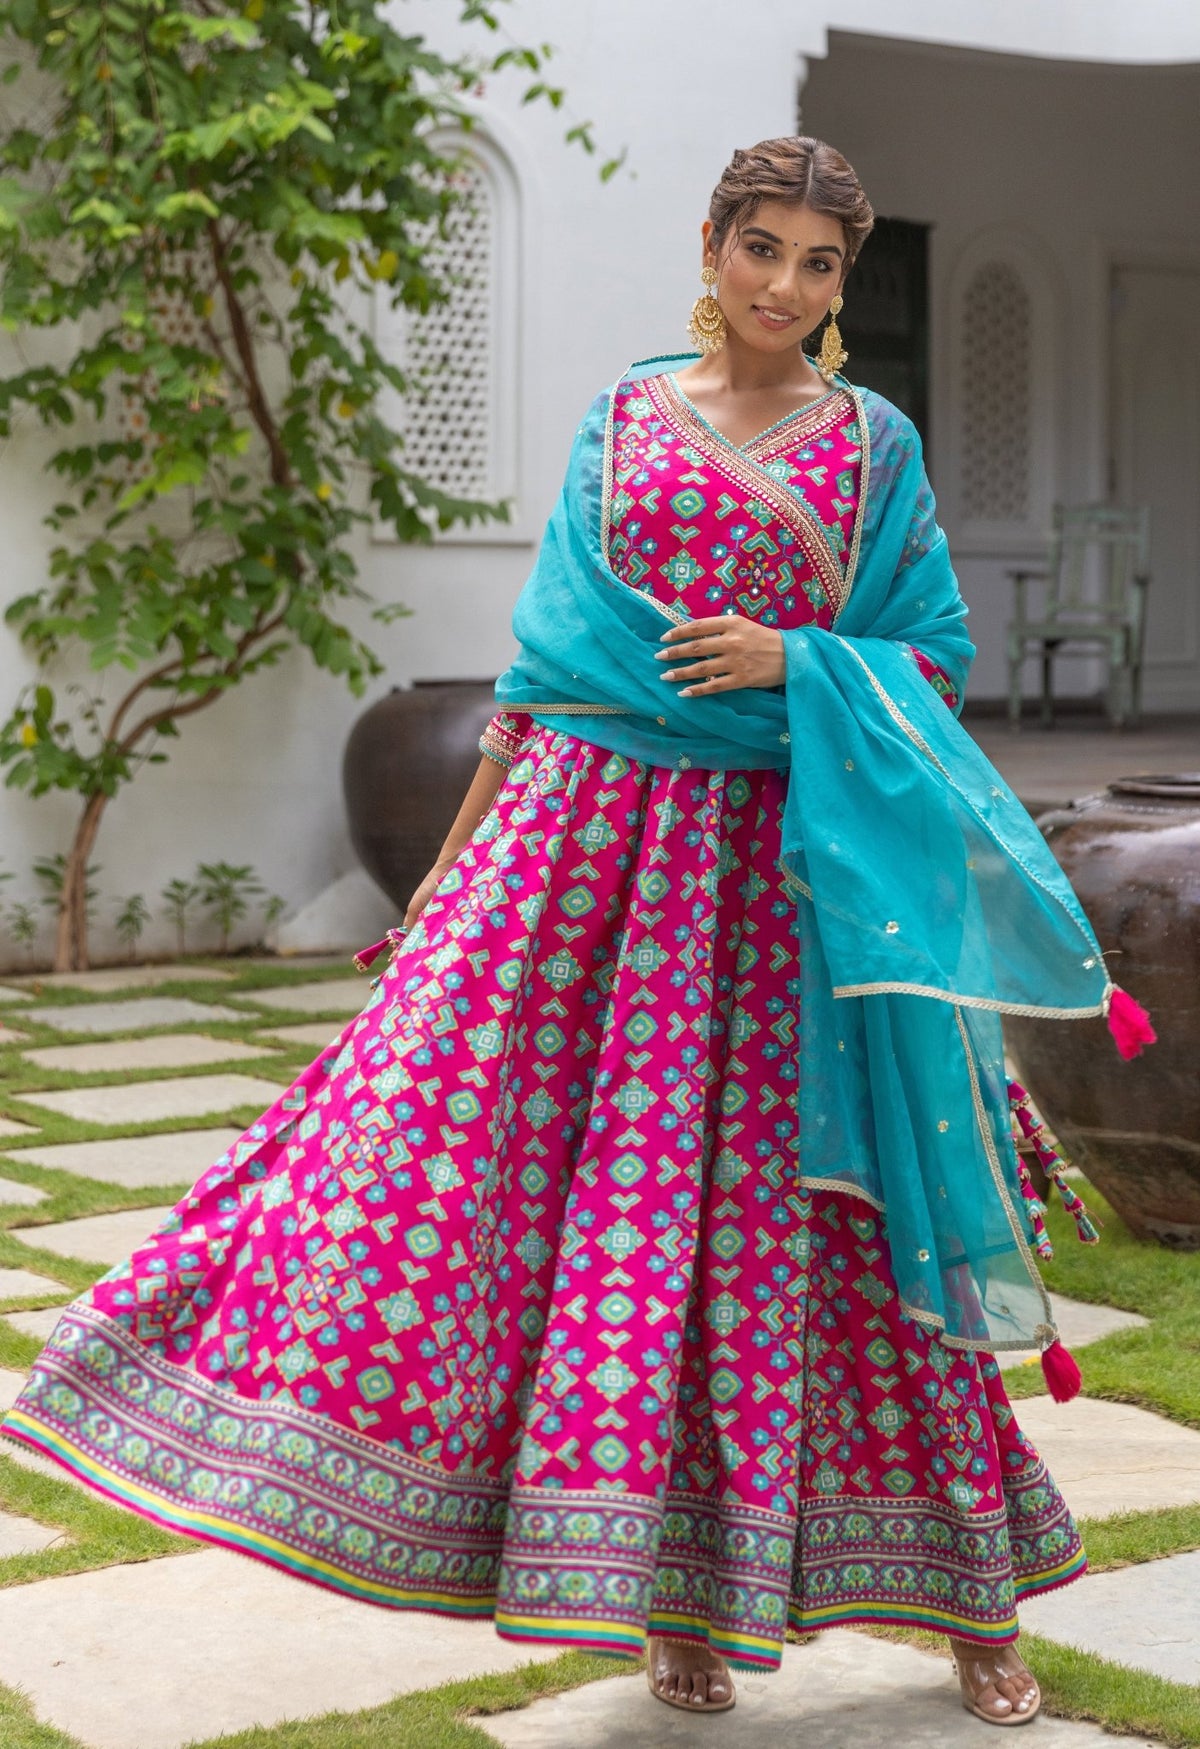 Ethnic Dresses - Shop the Most Trendy and Designer Ethnic Wear